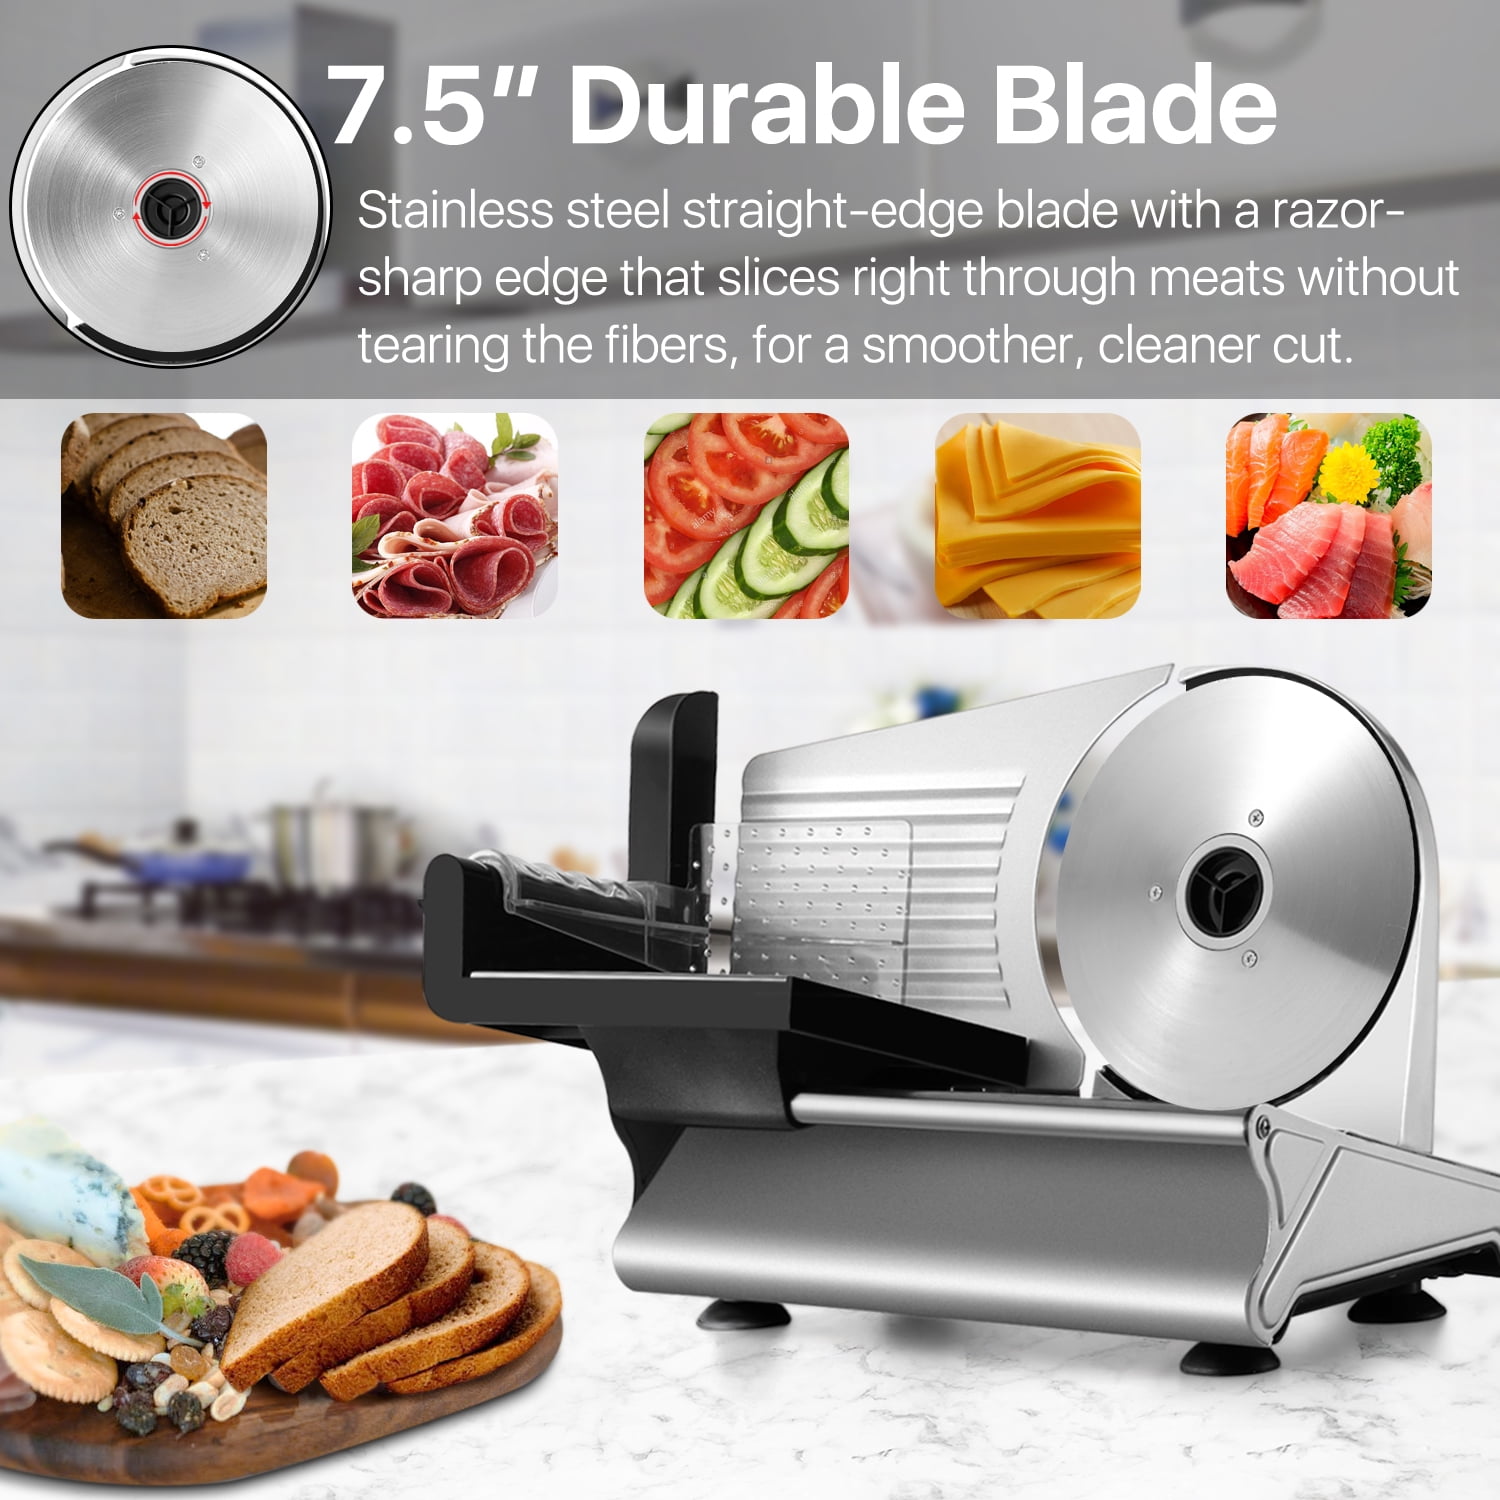 Mliter Electric Food Slicer Precision 7.5-Inch Stainless Steel Blade For  Bread and Meat, 150 Watt - Bed Bath & Beyond - 28716825